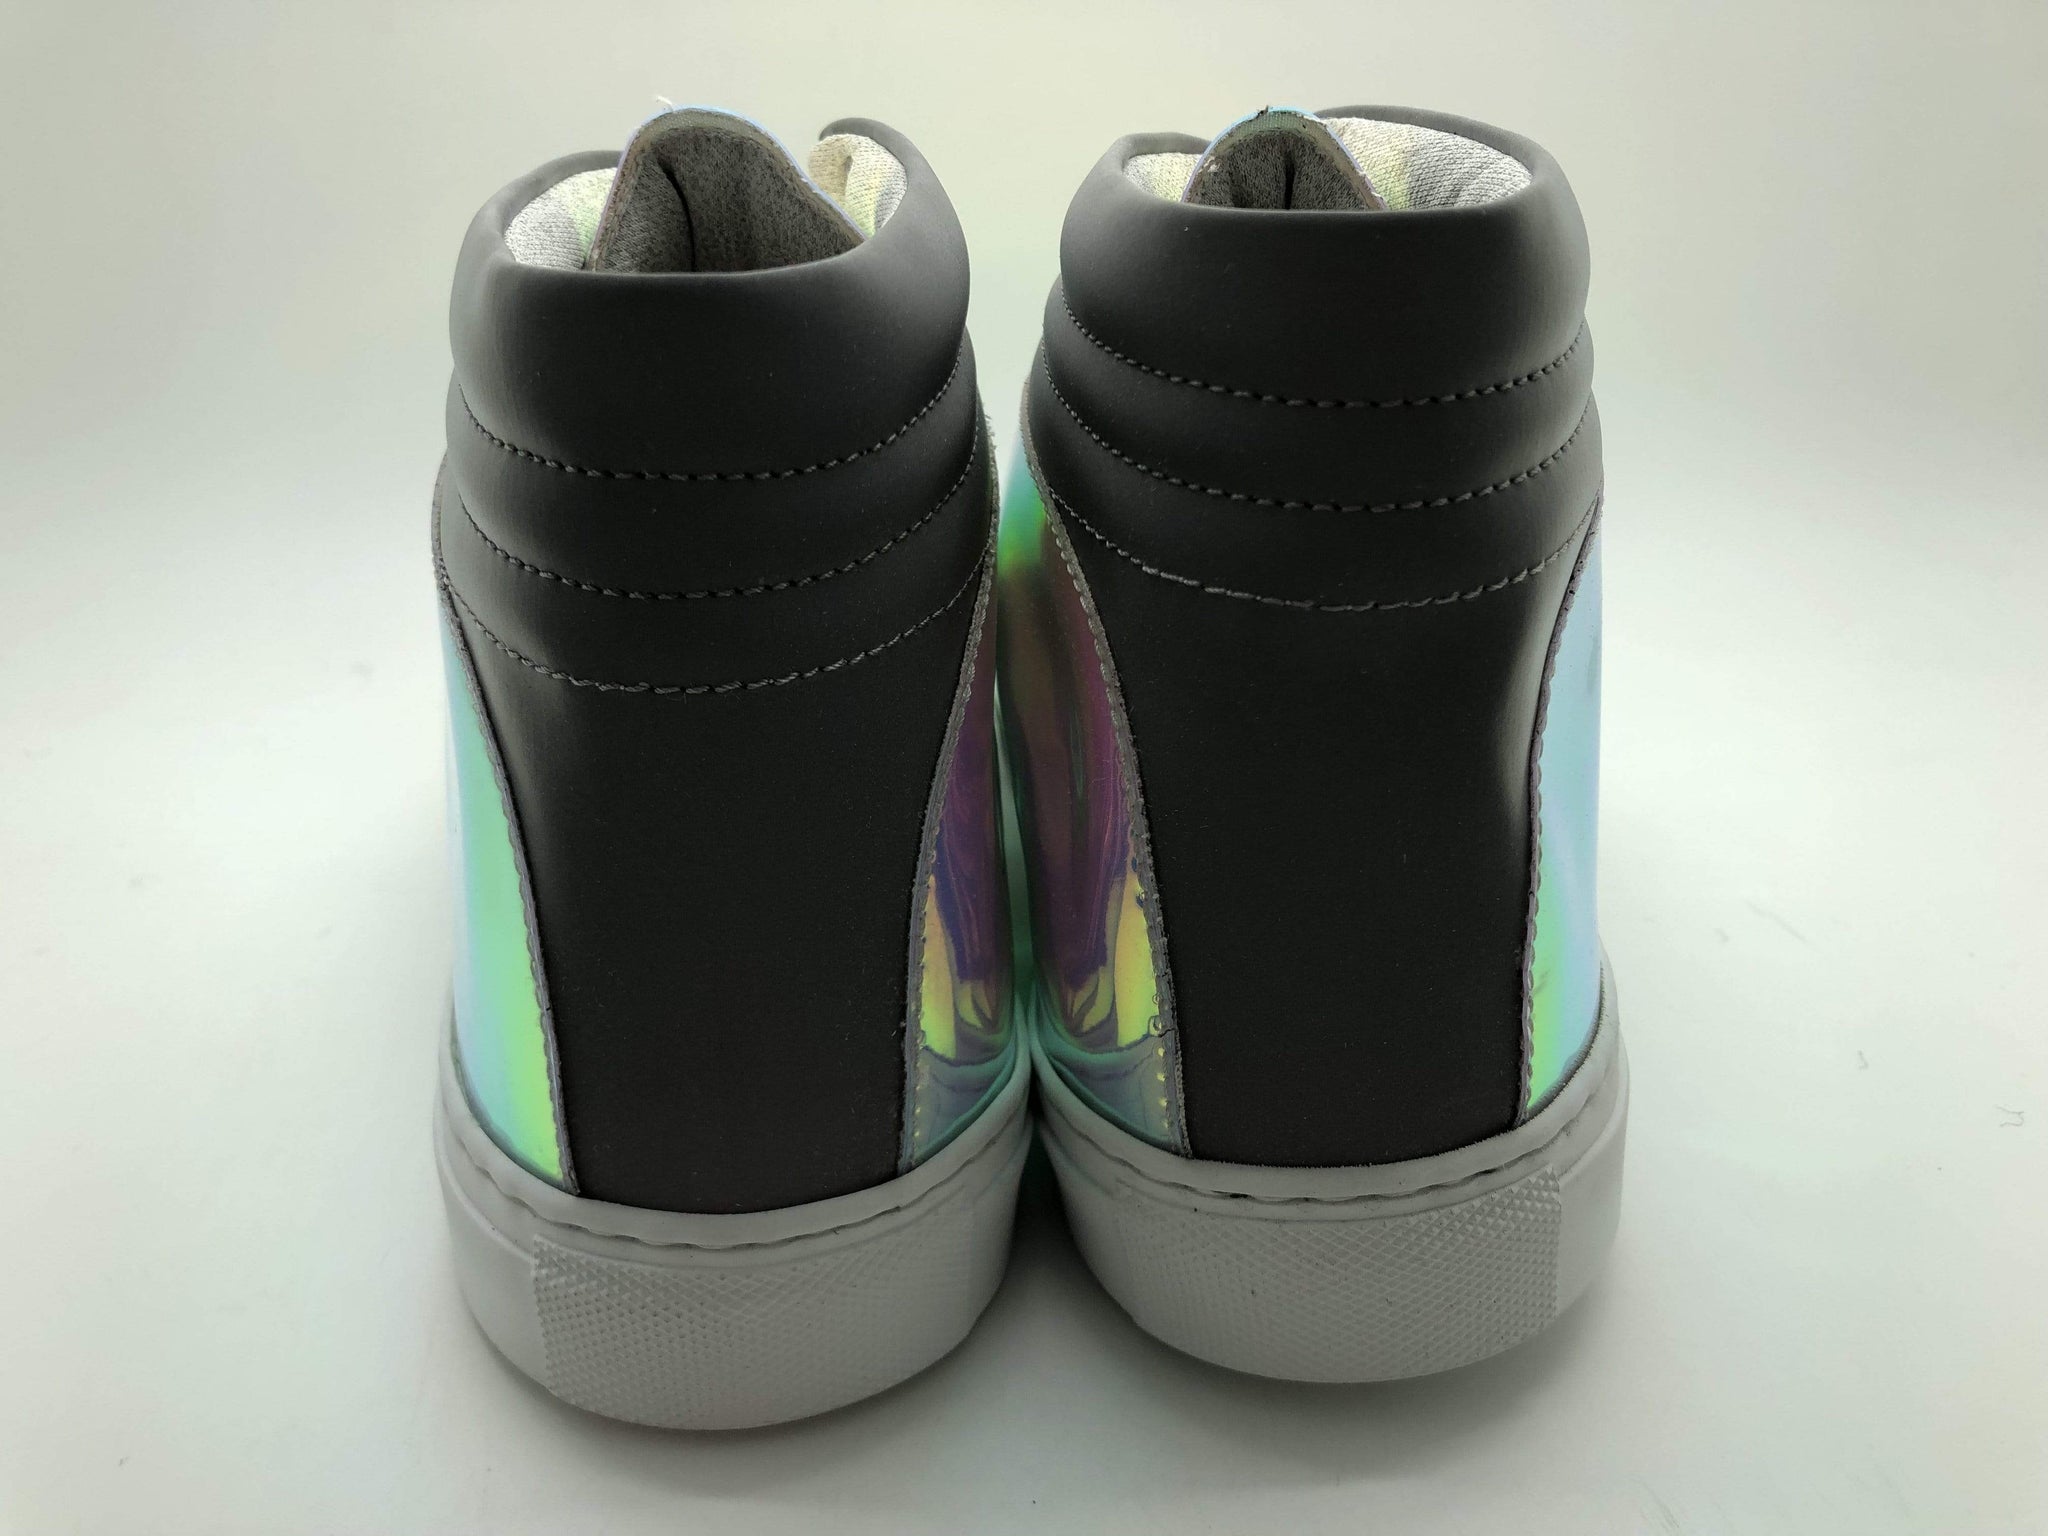 lv iridescent shoes